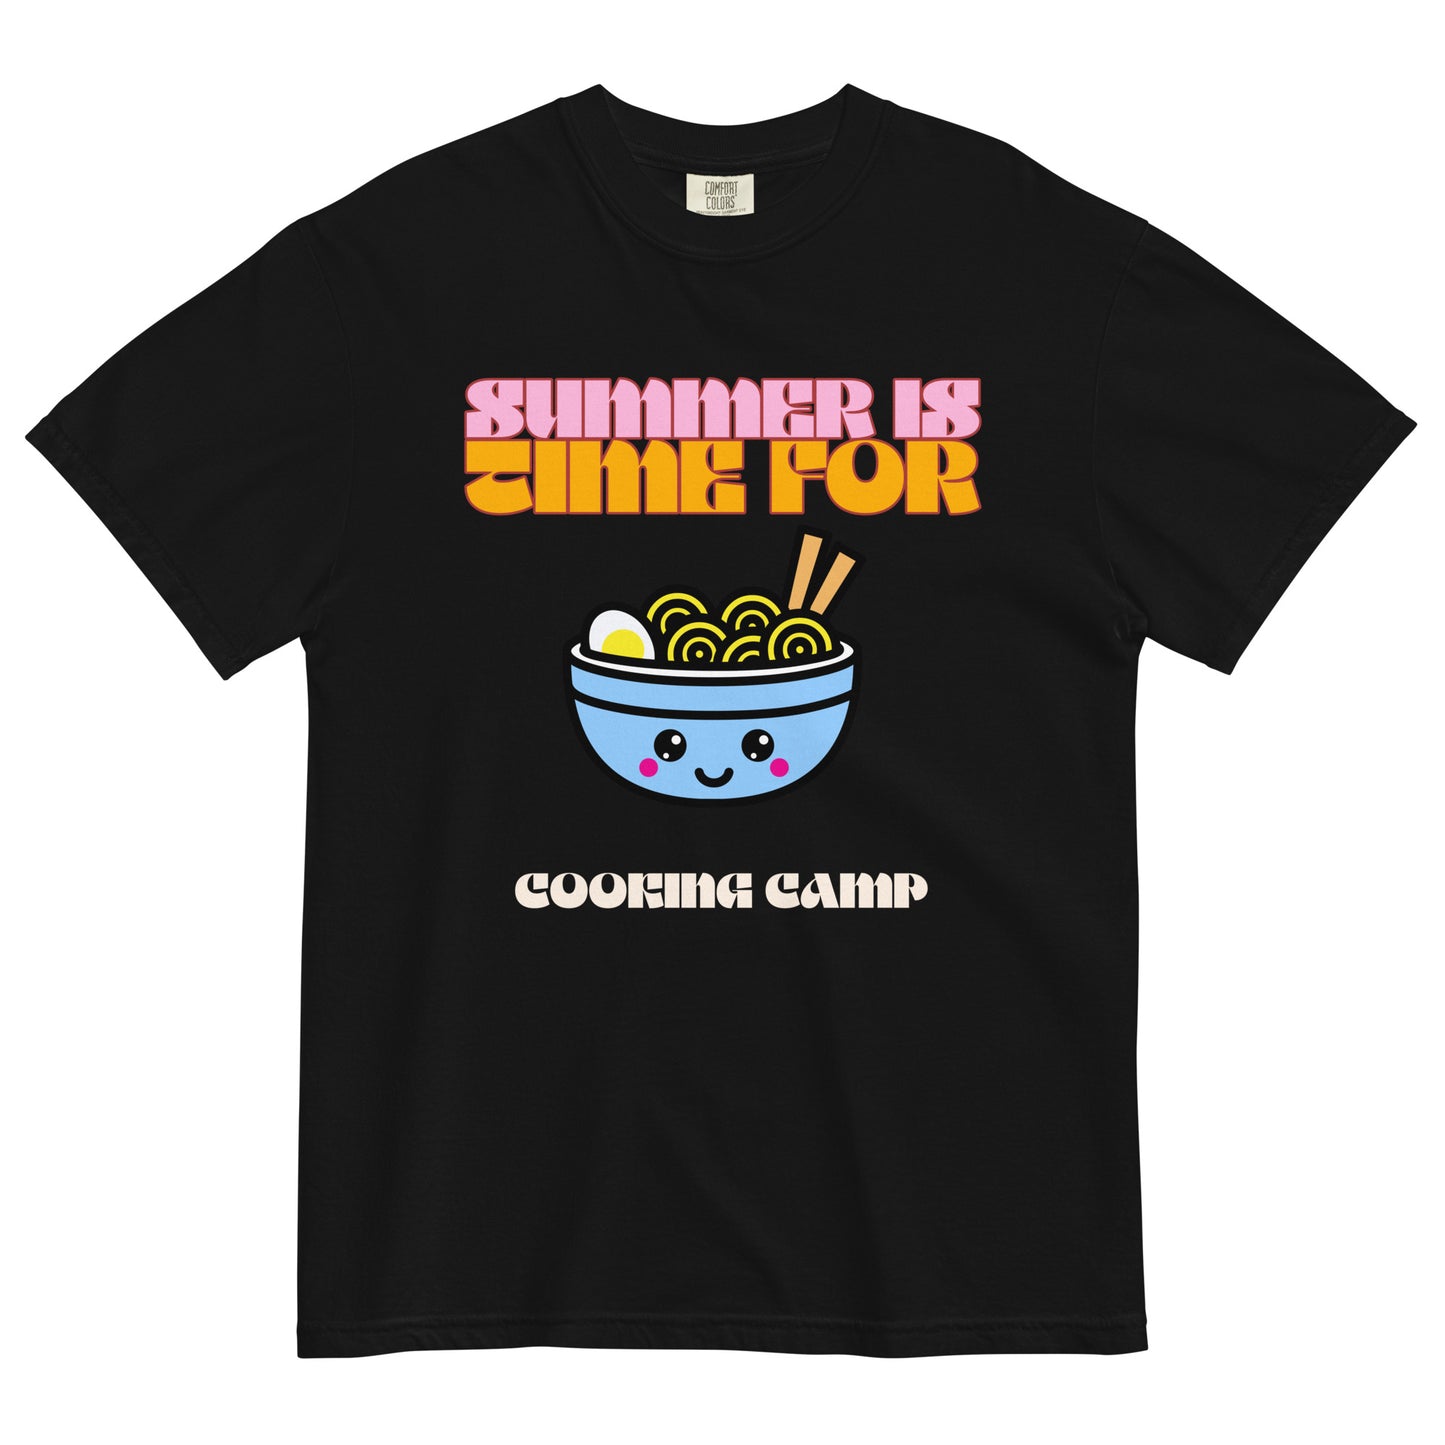 Level Up Your Summer: Cooking Camp T-Shirt!